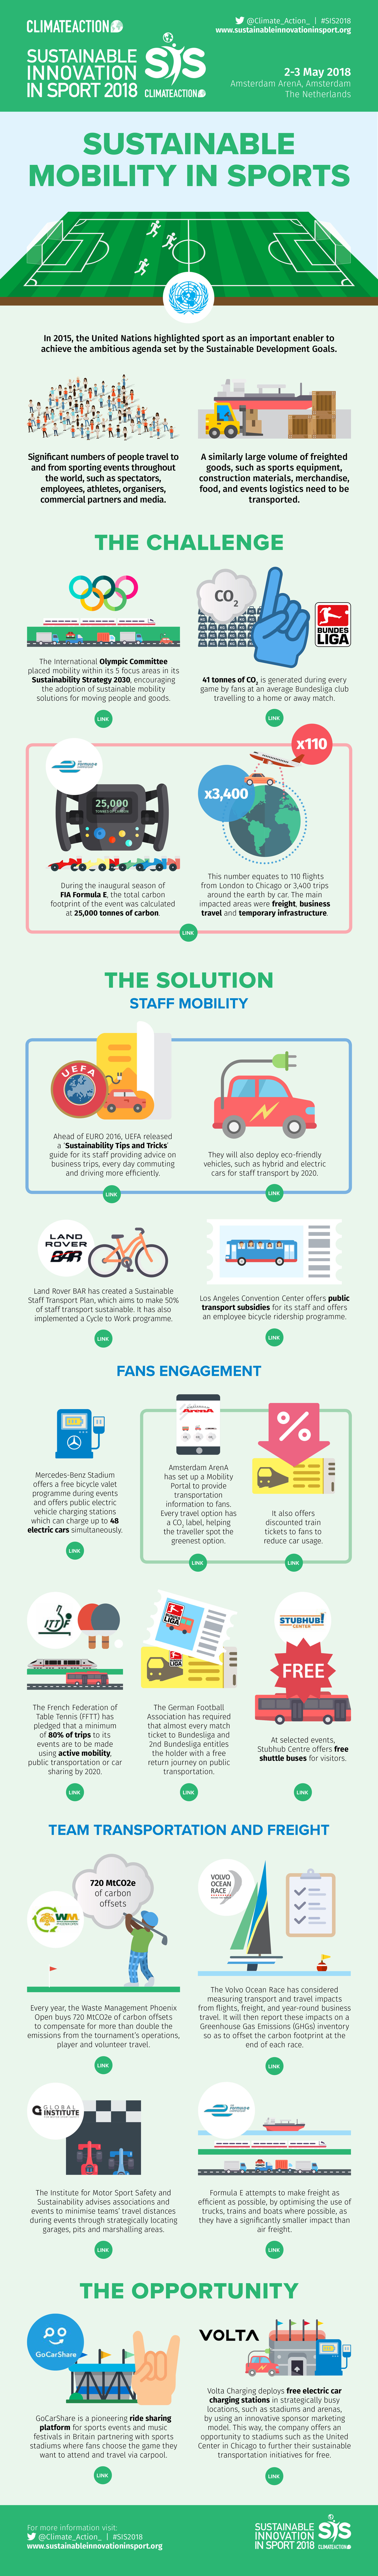 Climate Action calls attention to the need for sustainable mobility in sports with an infographic depicting obstacles, opportunities and solutions such as programs implemented by AEG’s Los Angeles Convention Center and StubHub Center. (Infographic courtesy of Climate Action)